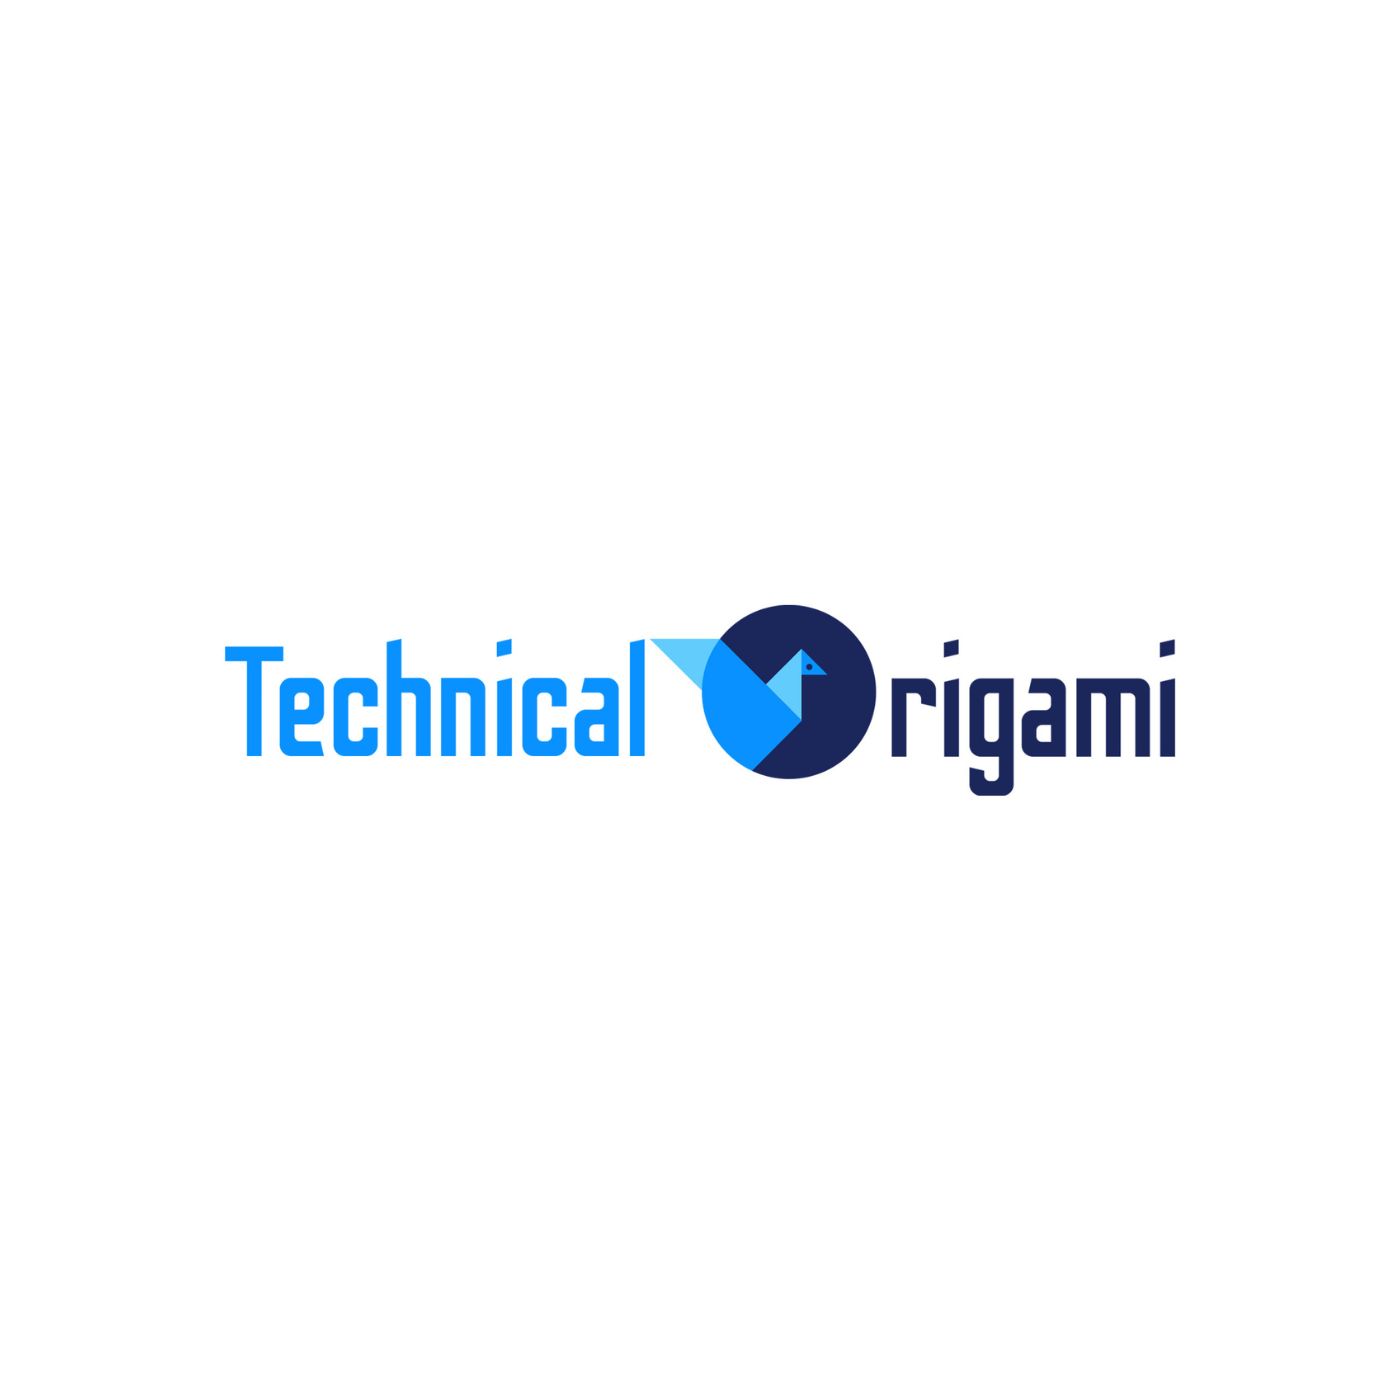 Best Digital Marketing Services Company In UK Ilkley | Technical Origami